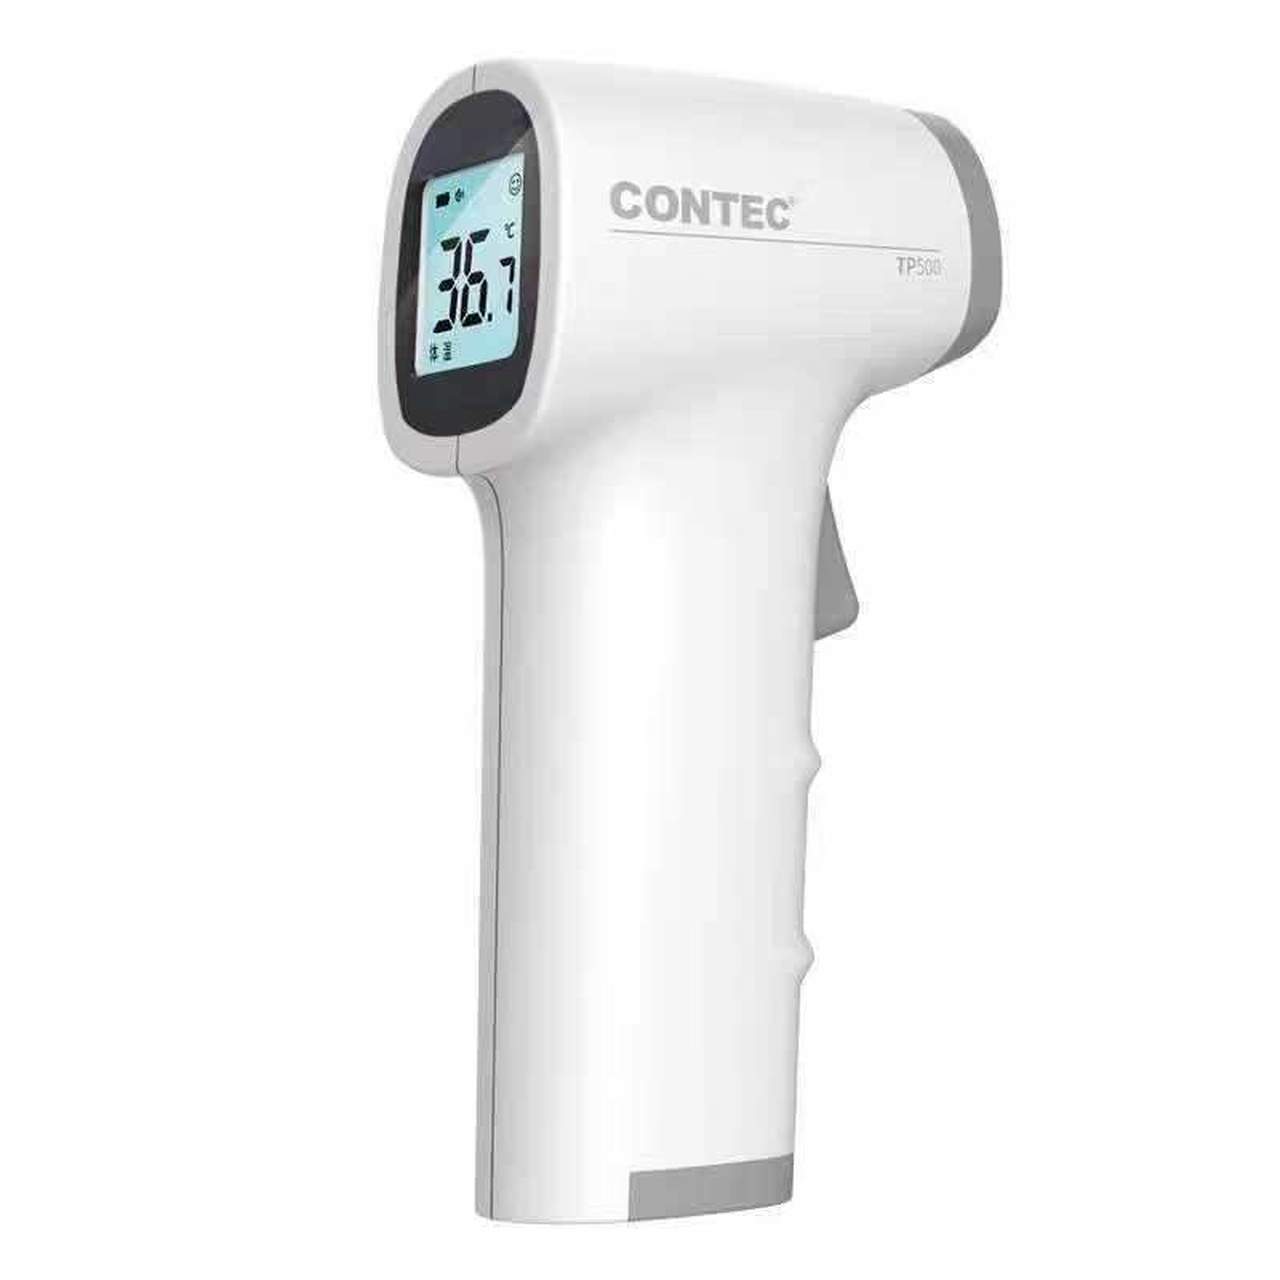 Infrared Thermometer TP500 CONTEC